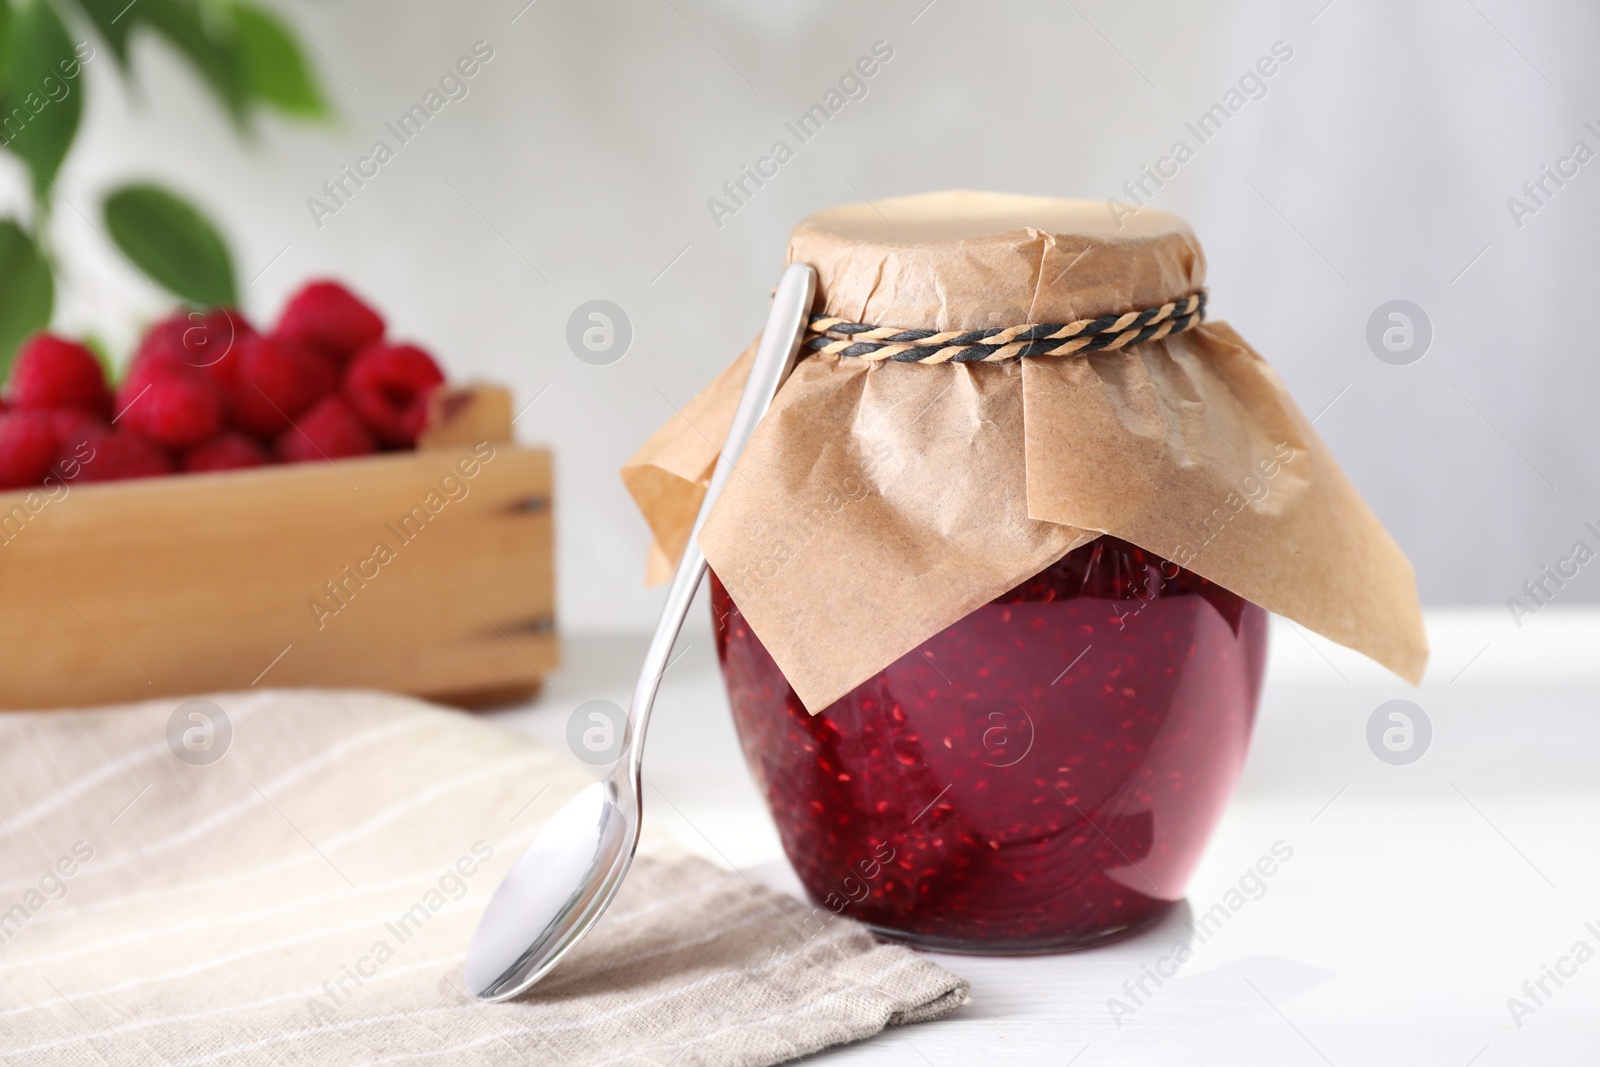 Photo of Delicious raspberry jam in jar on white table